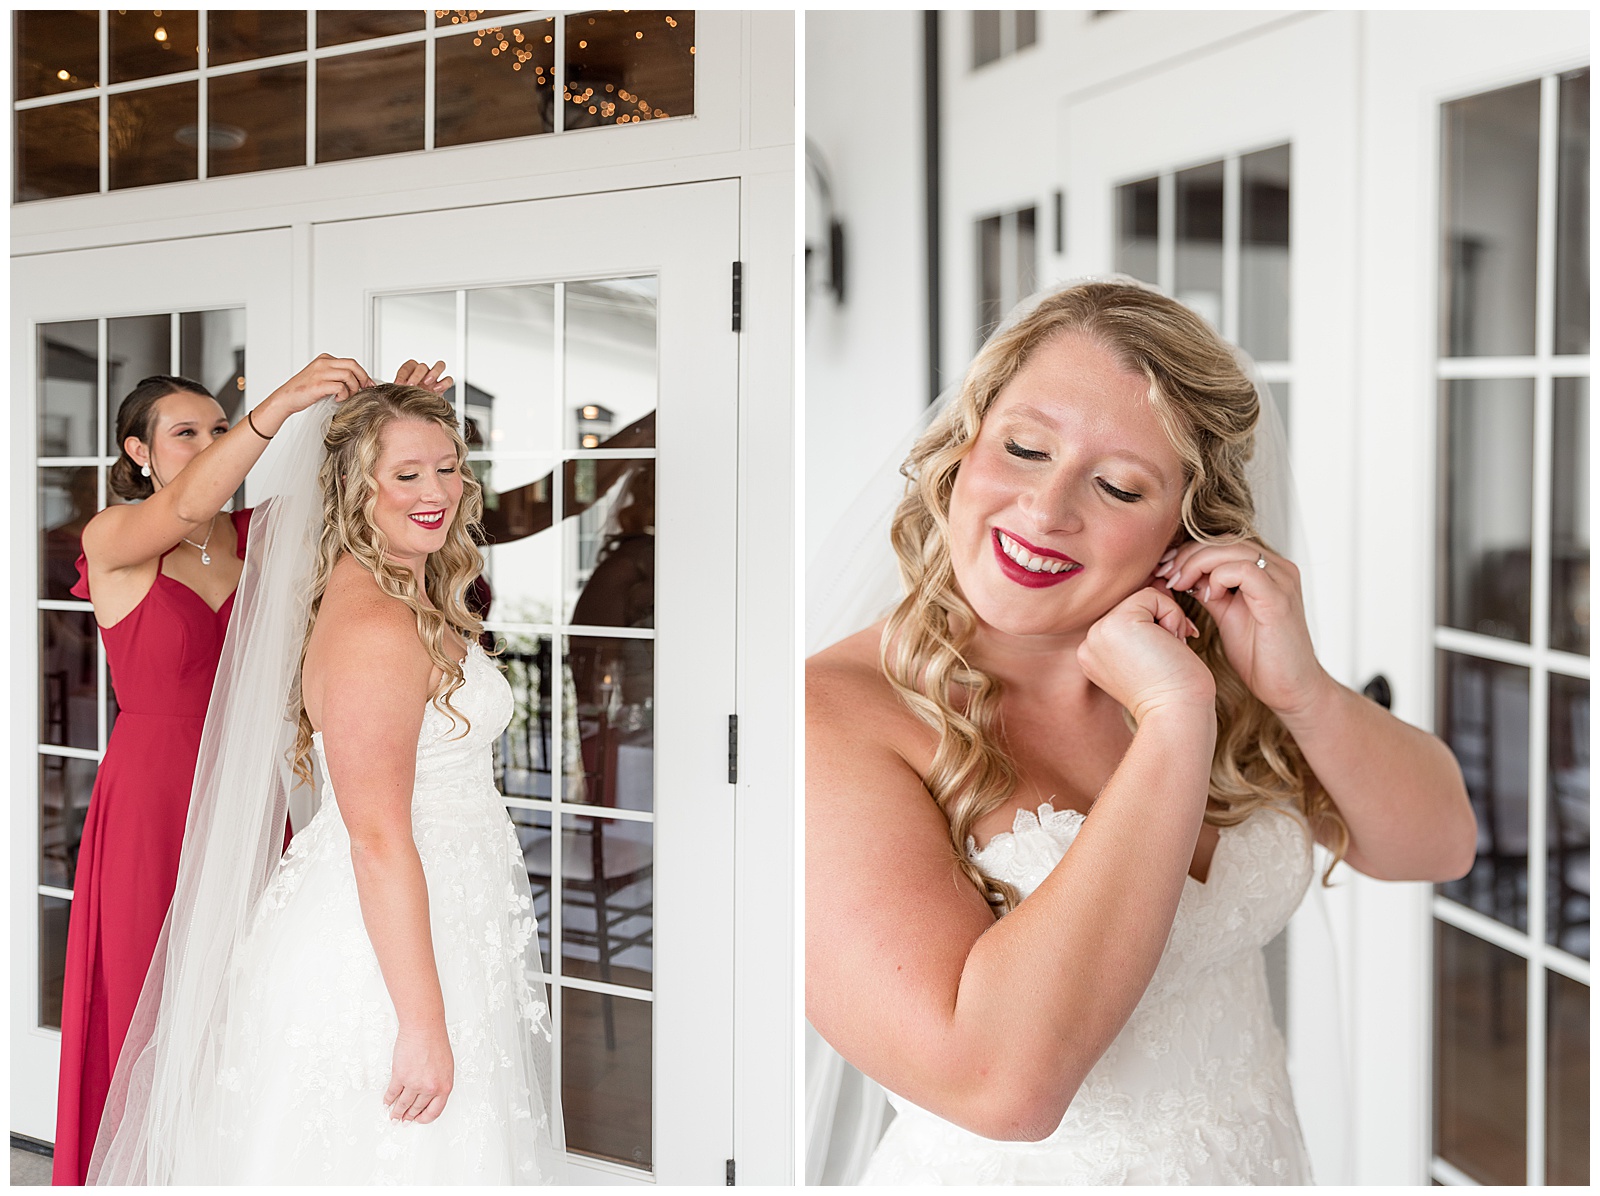 bride putting her earring on and matron of honor helping bride with her veil by bridal suite